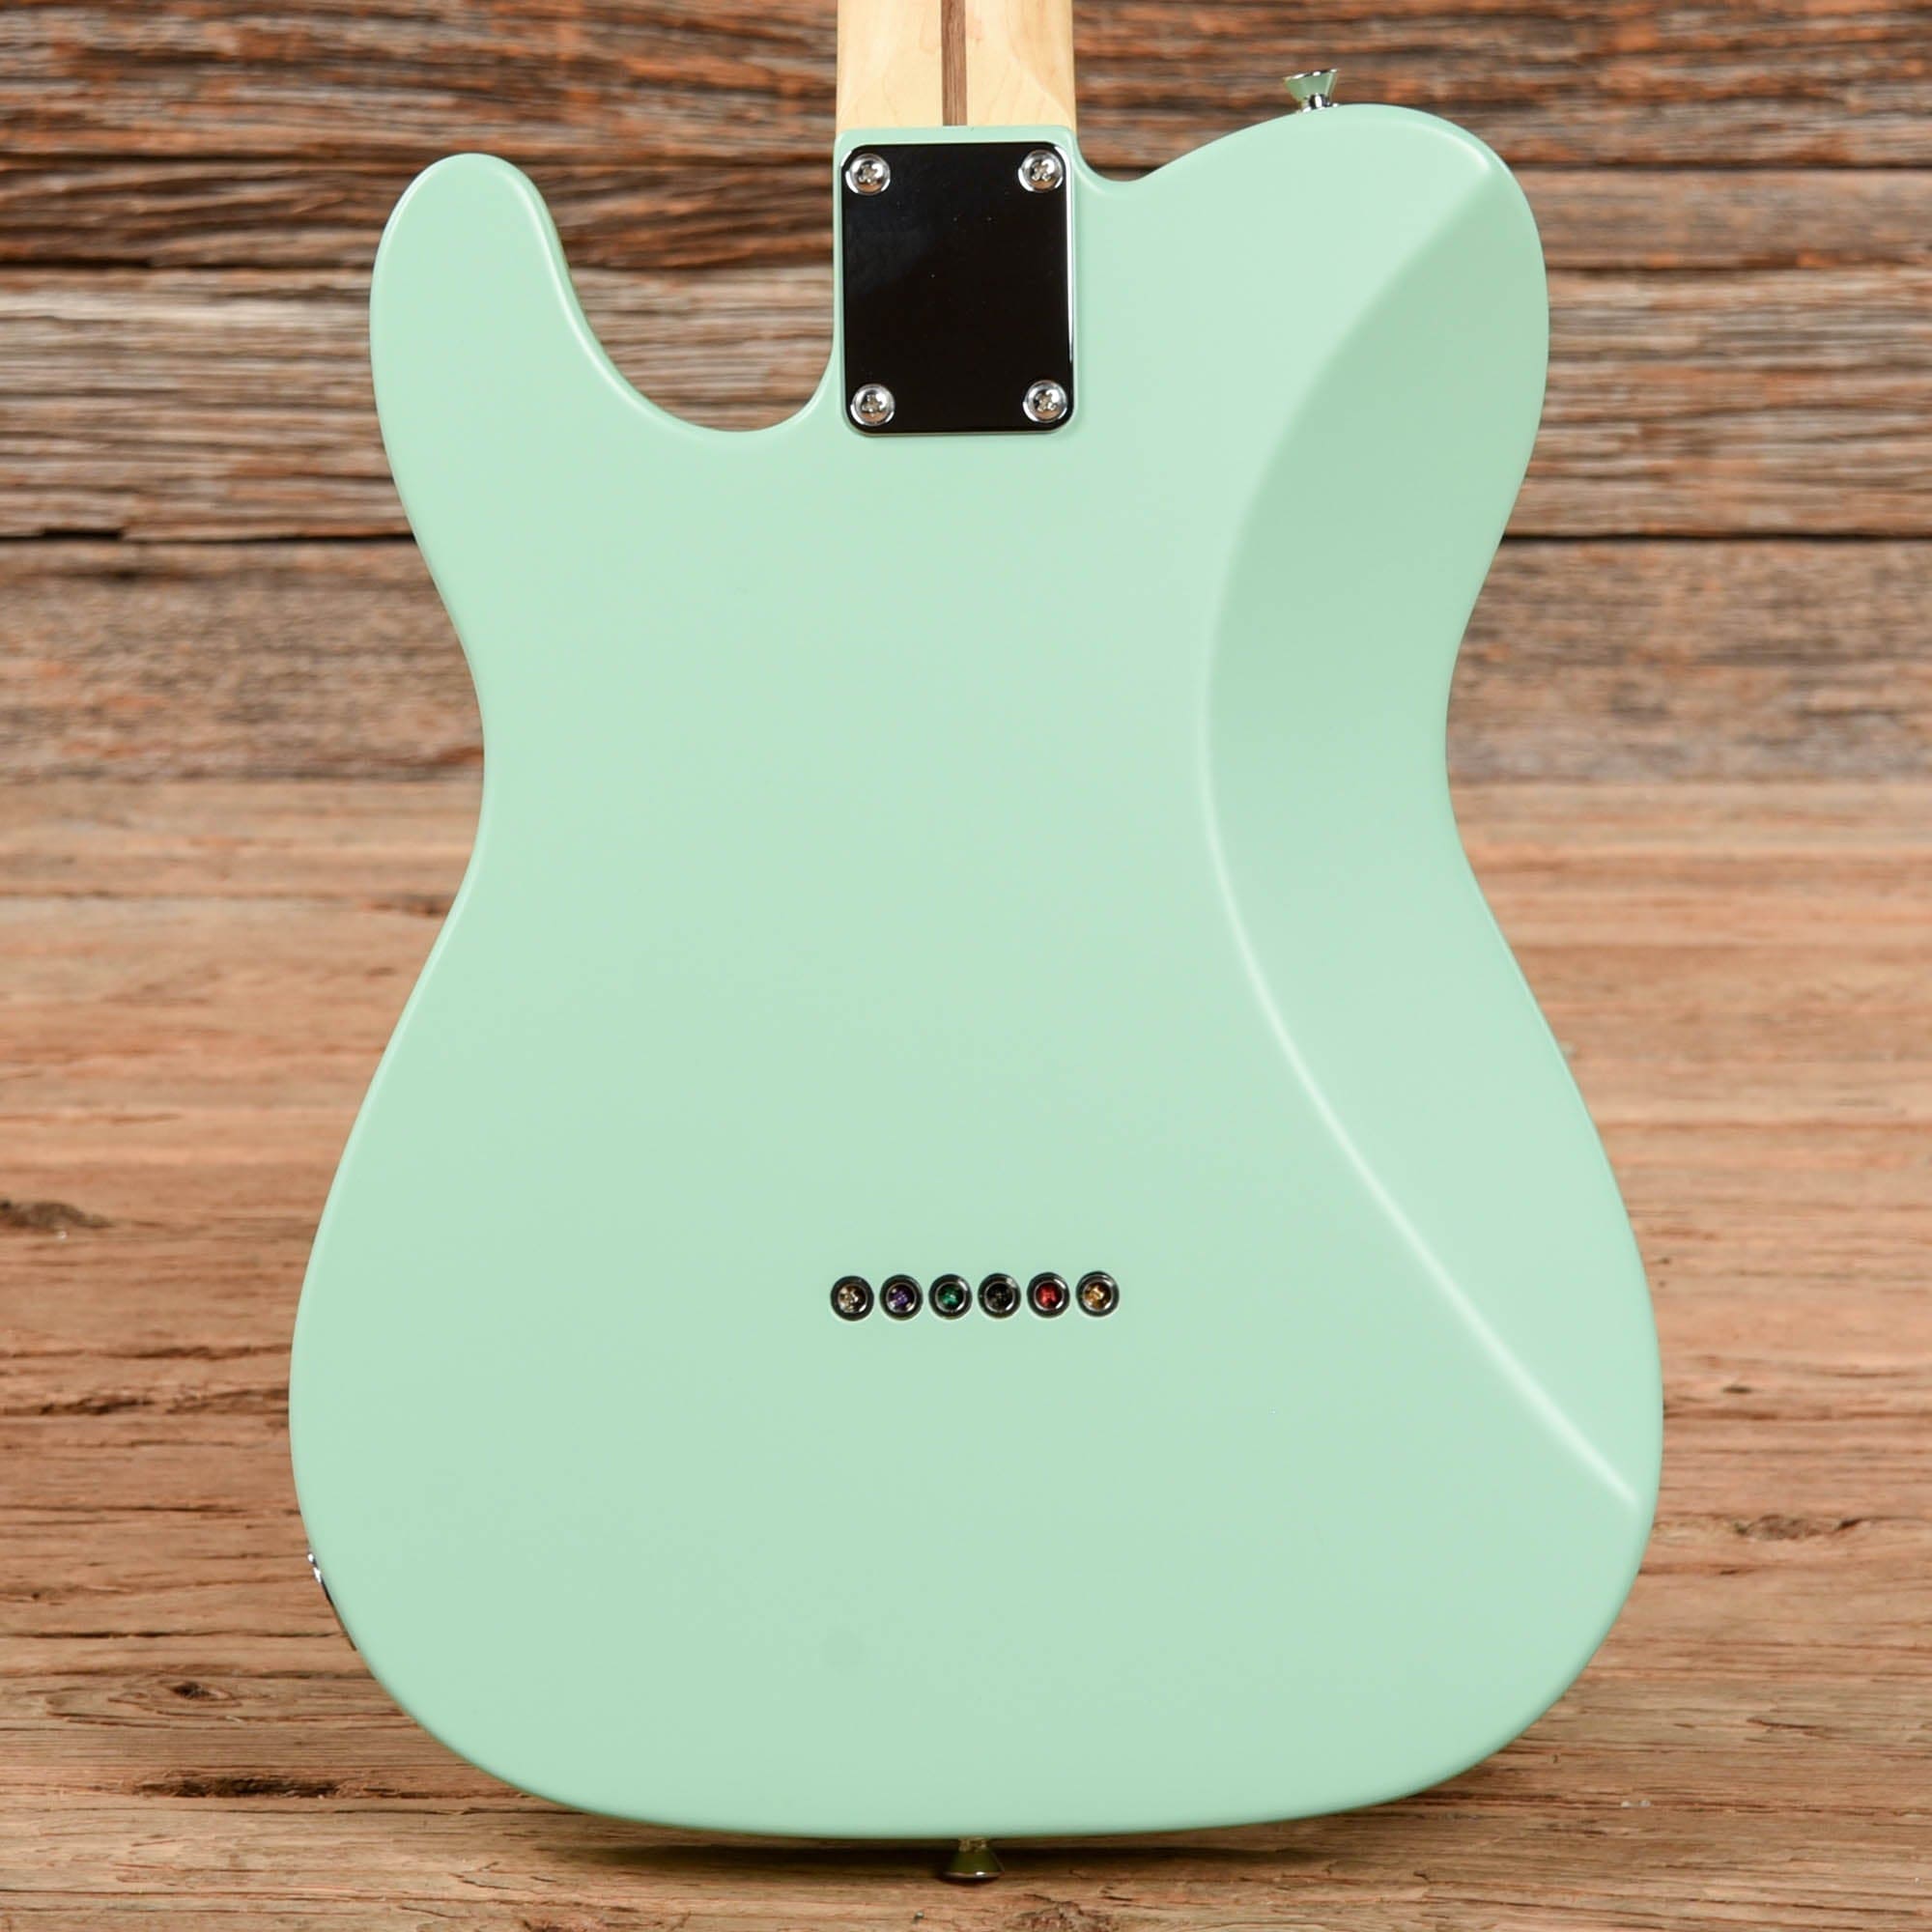 Fender MIJ Junior Collection Telecaster Satin Surf Green 2022 Electric Guitars / Solid Body